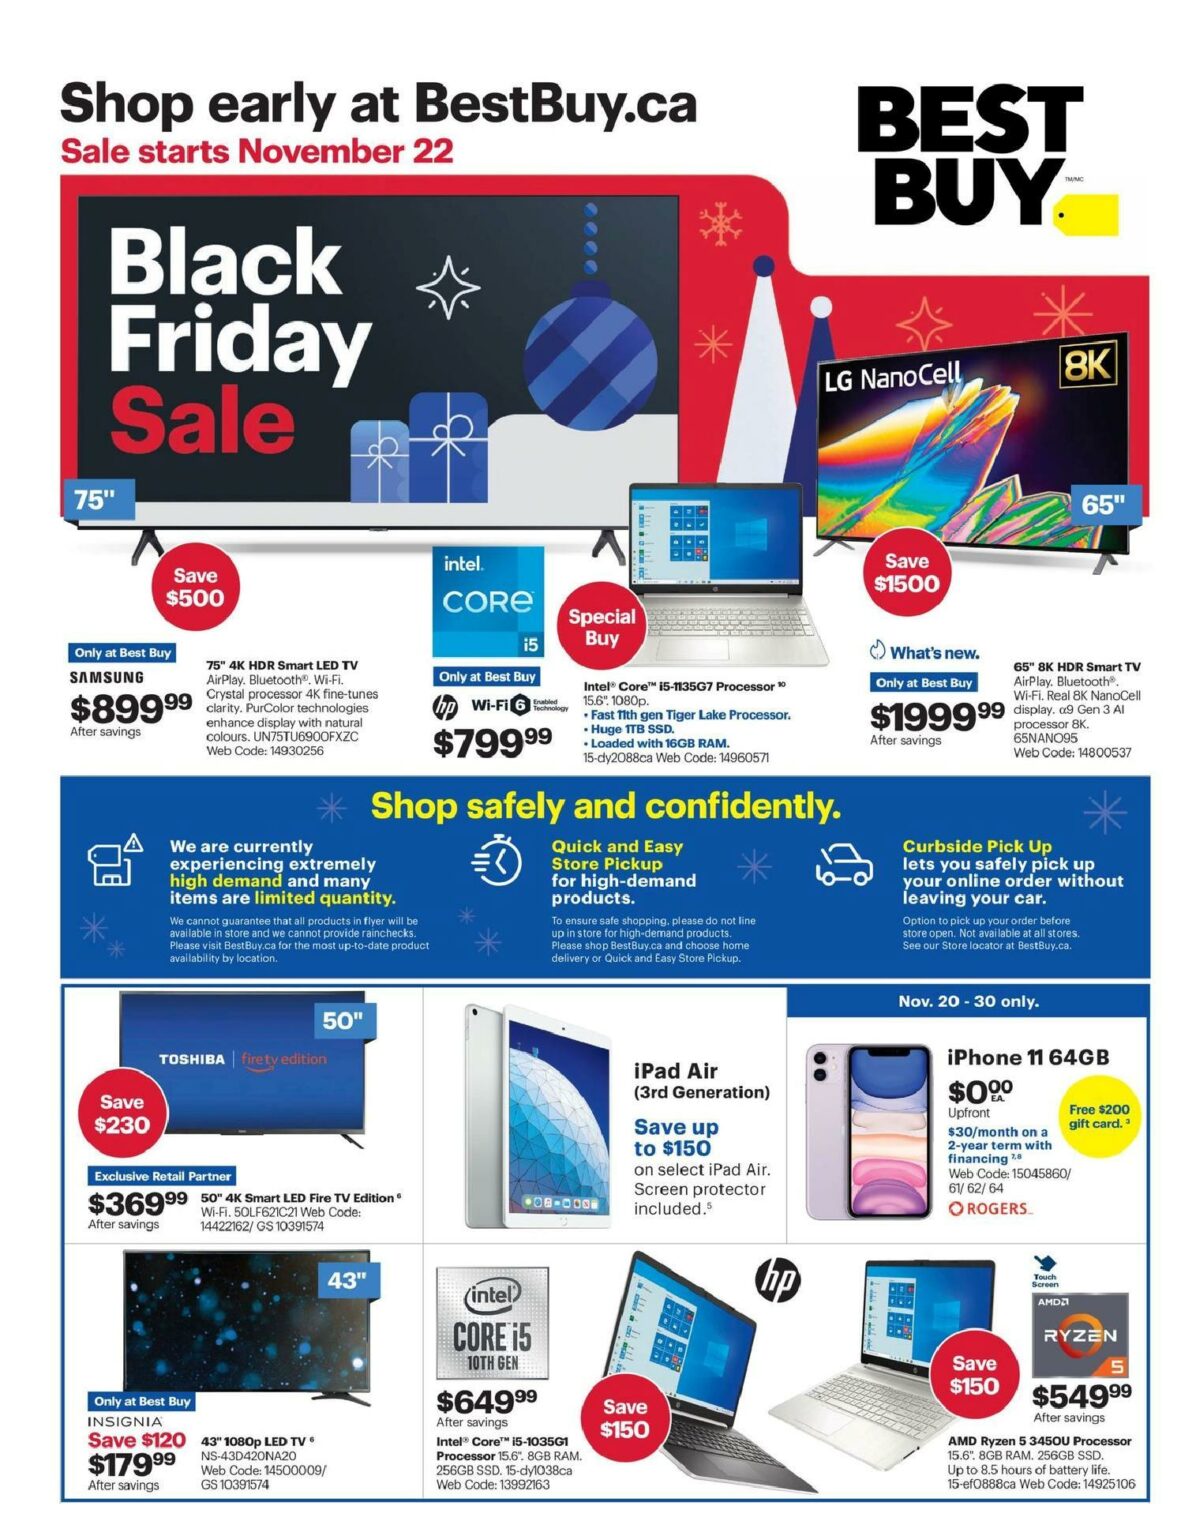 Best Buy Black Friday Flyer Deals 2020 Canada - What Stores Can You Black Friday Shop Online